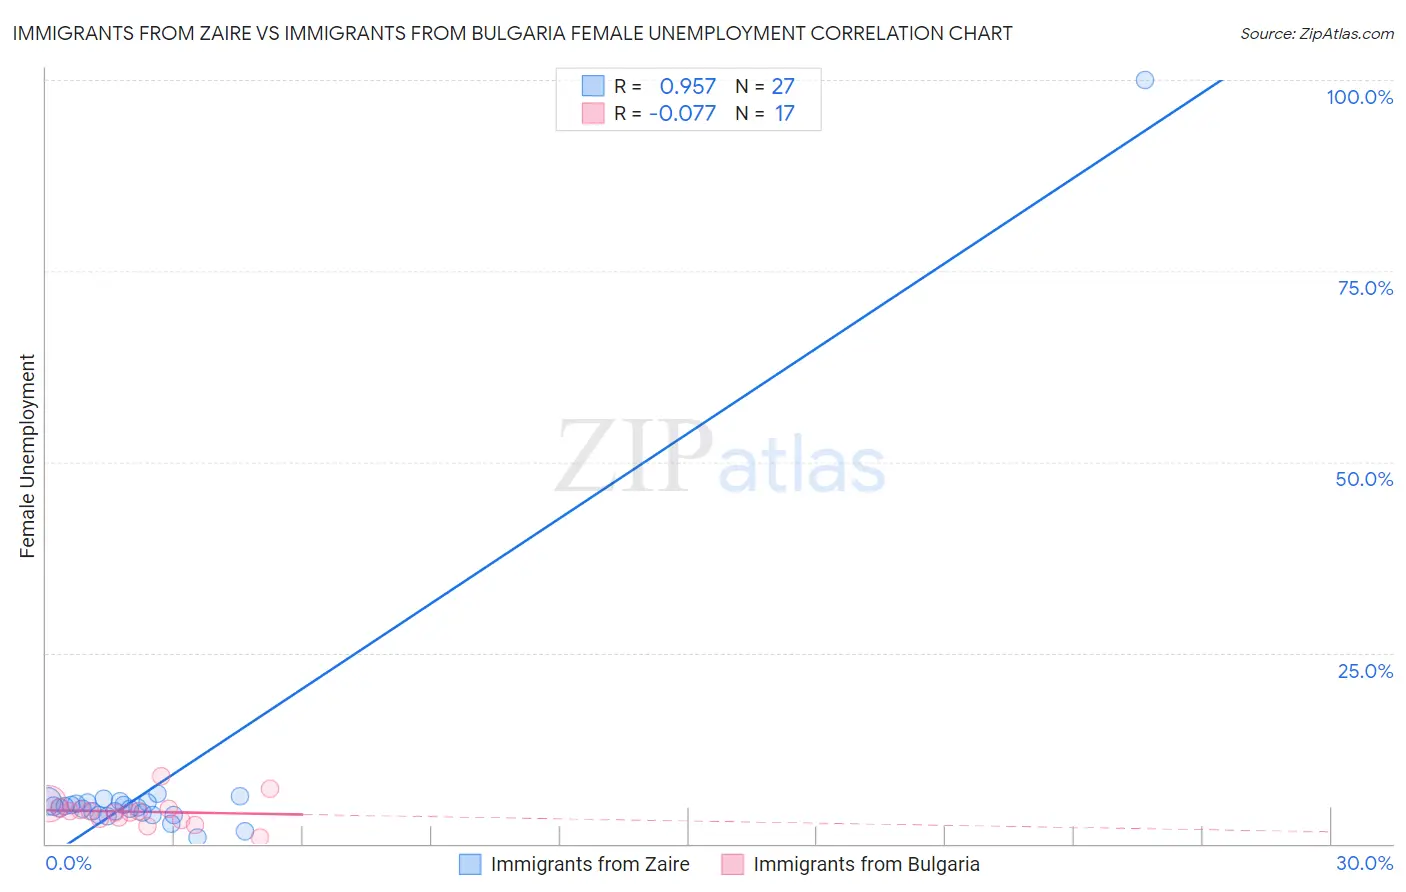 Immigrants from Zaire vs Immigrants from Bulgaria Female Unemployment